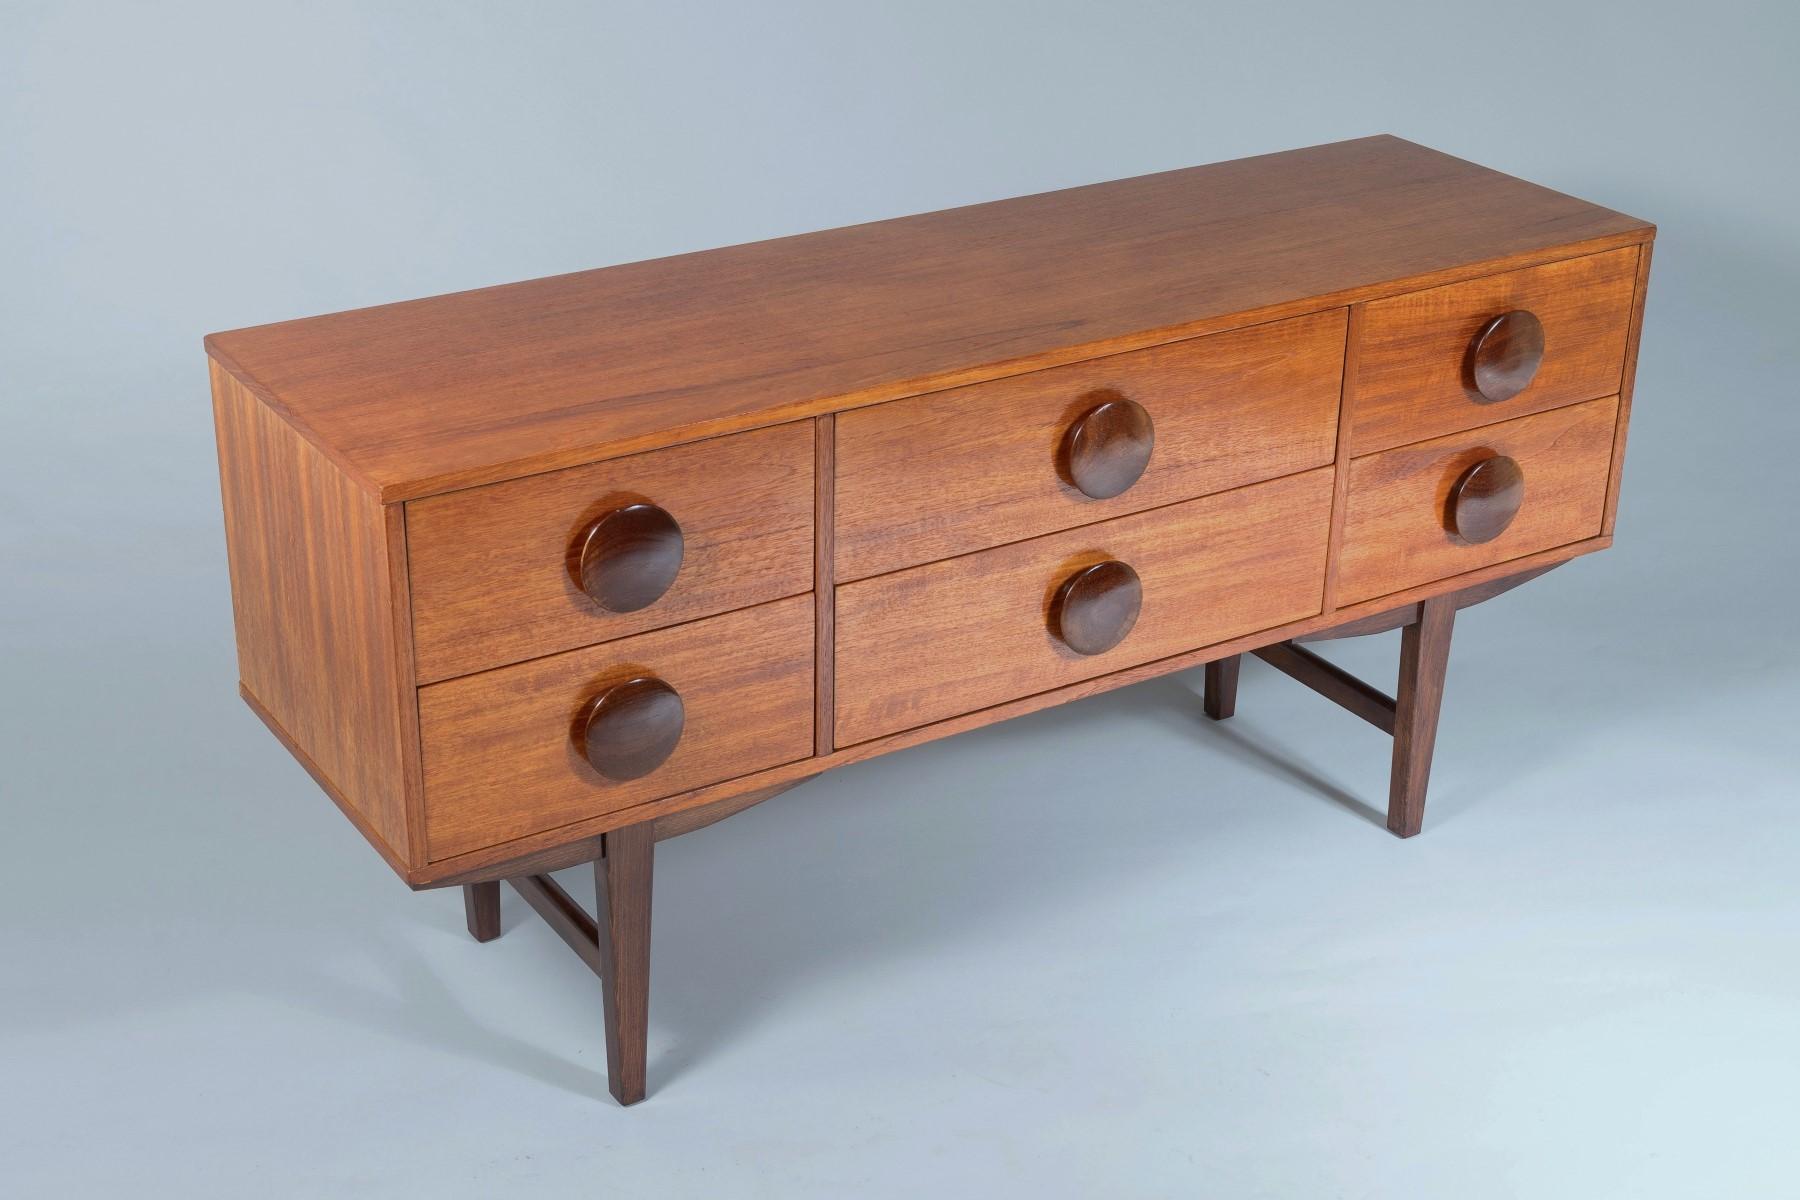 A 1960s Mid Century Button Handled Teak Sideboard  6 drawer Credenza In Good Condition For Sale In Llanbrynmair, GB